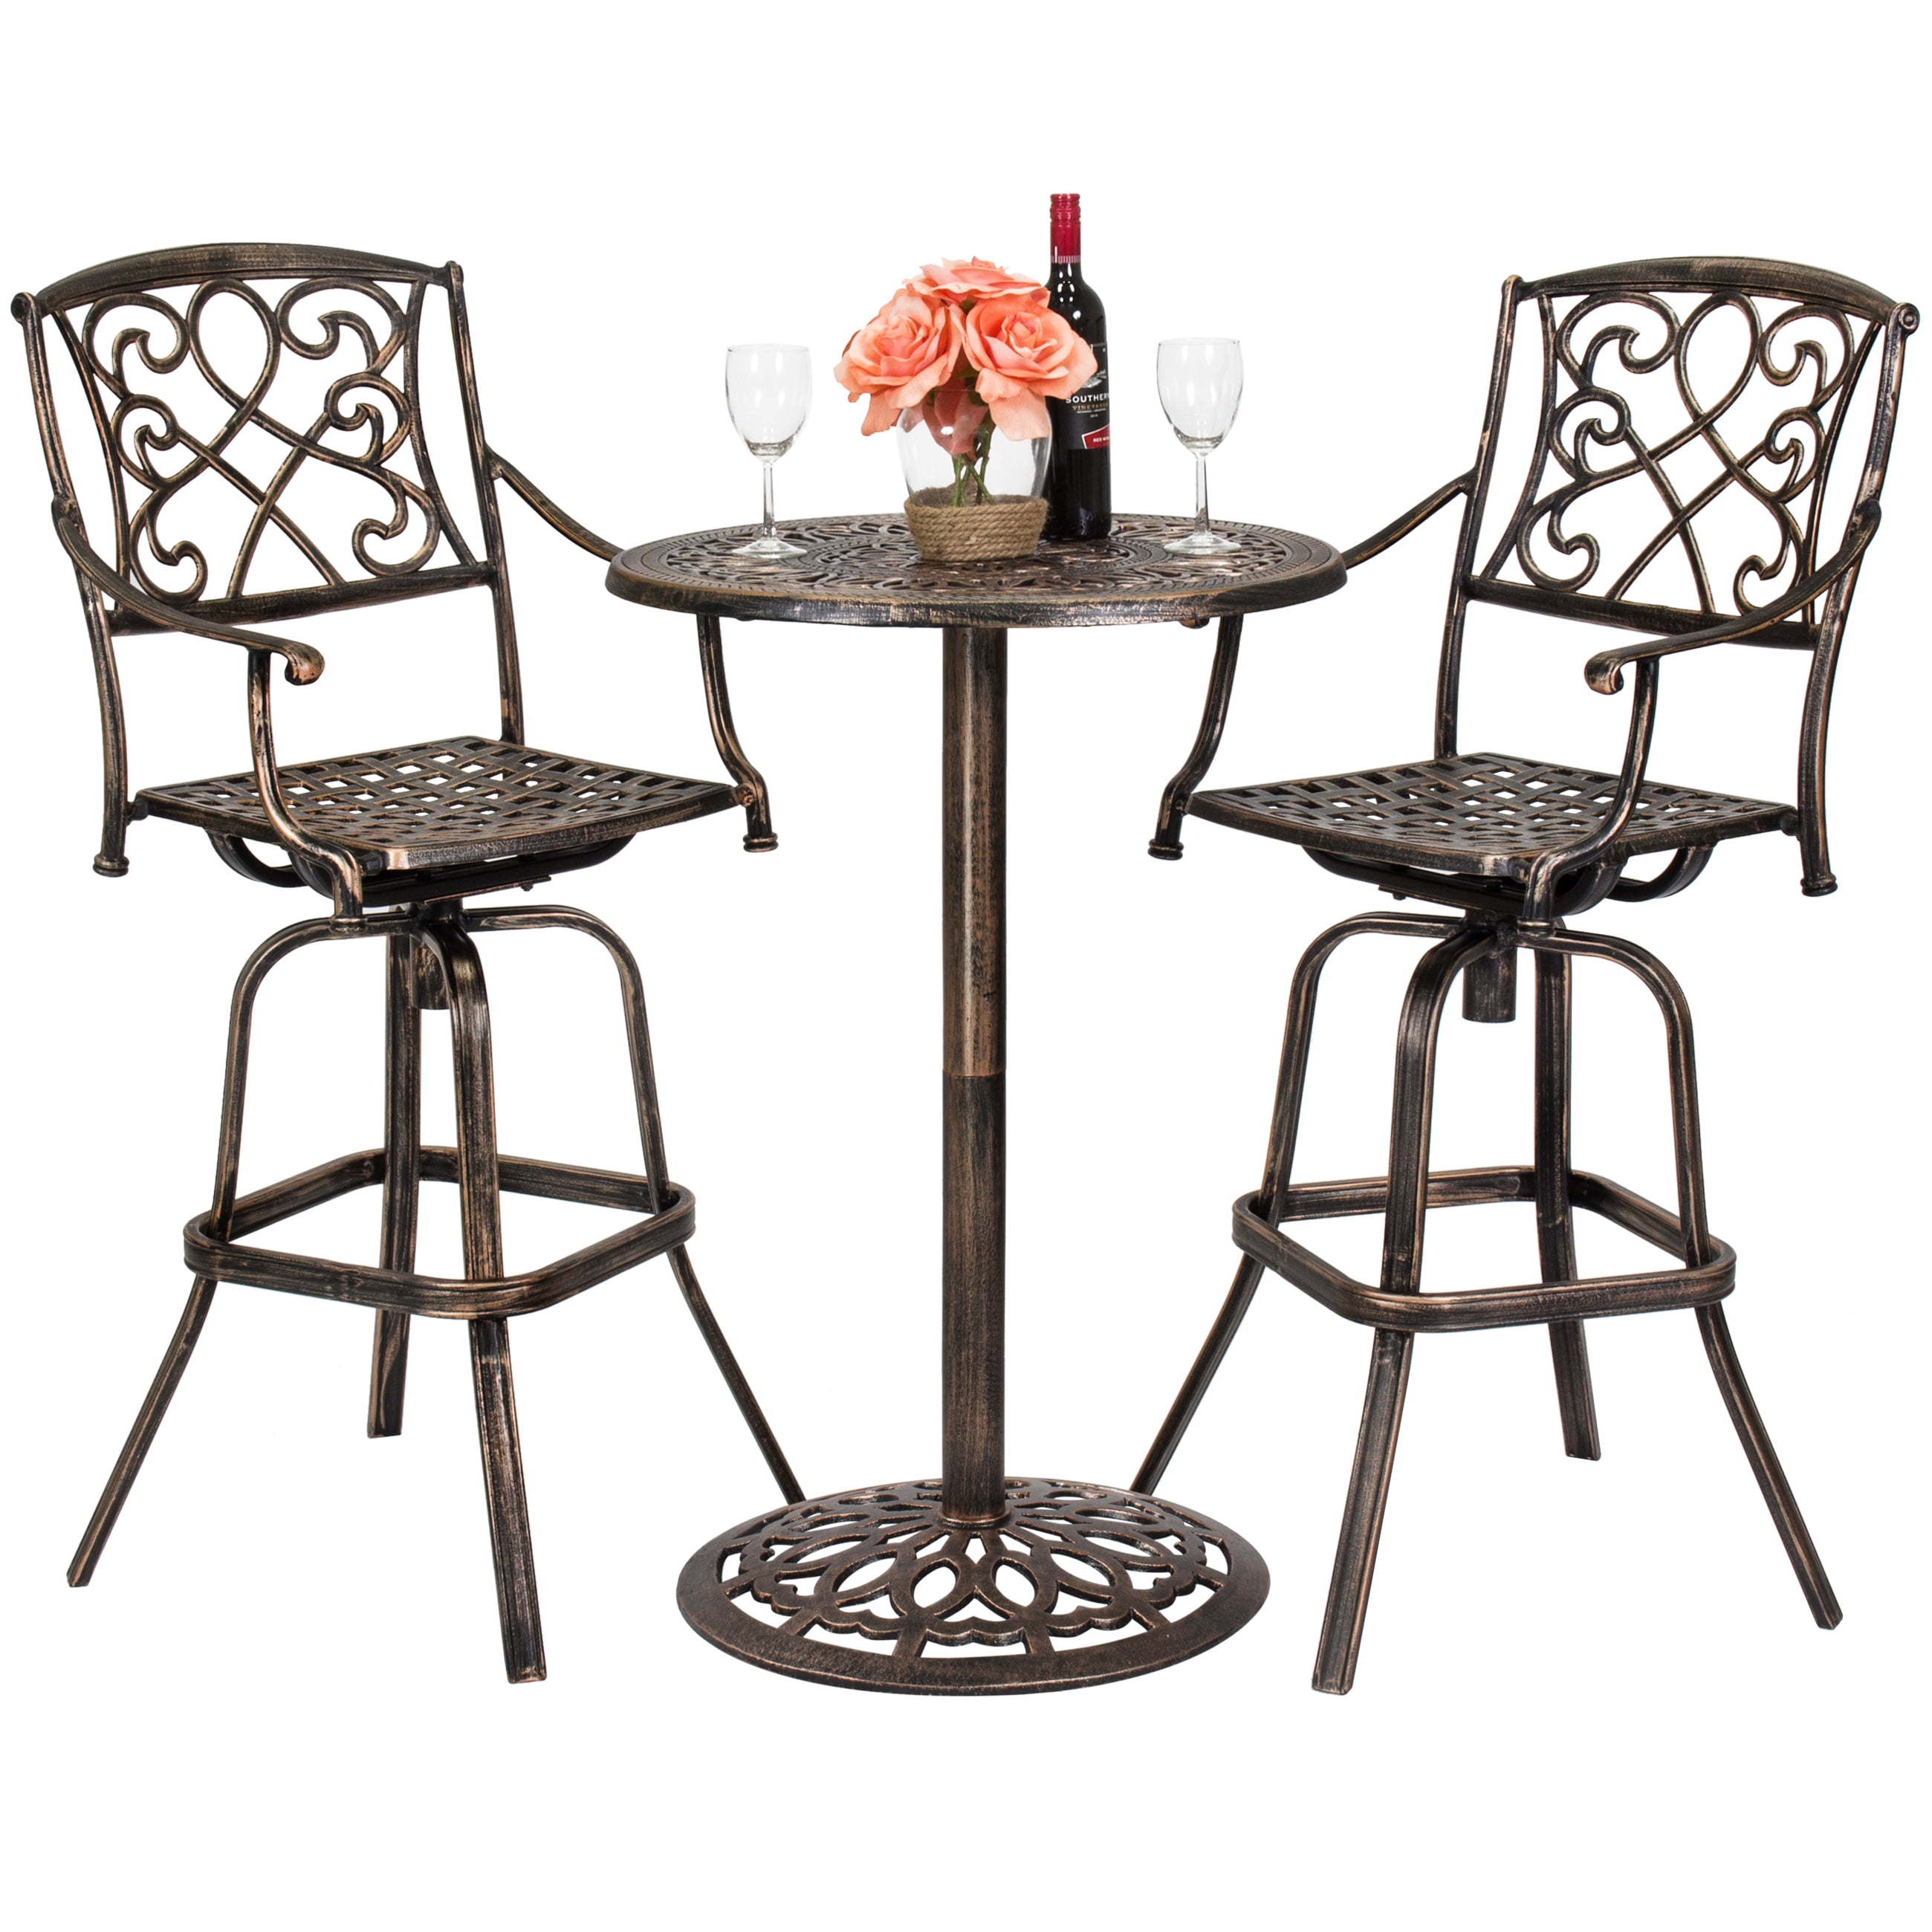 Outdoor Cast Aluminum Bar Height, Outdoor High Top Bistro Table And Chairs